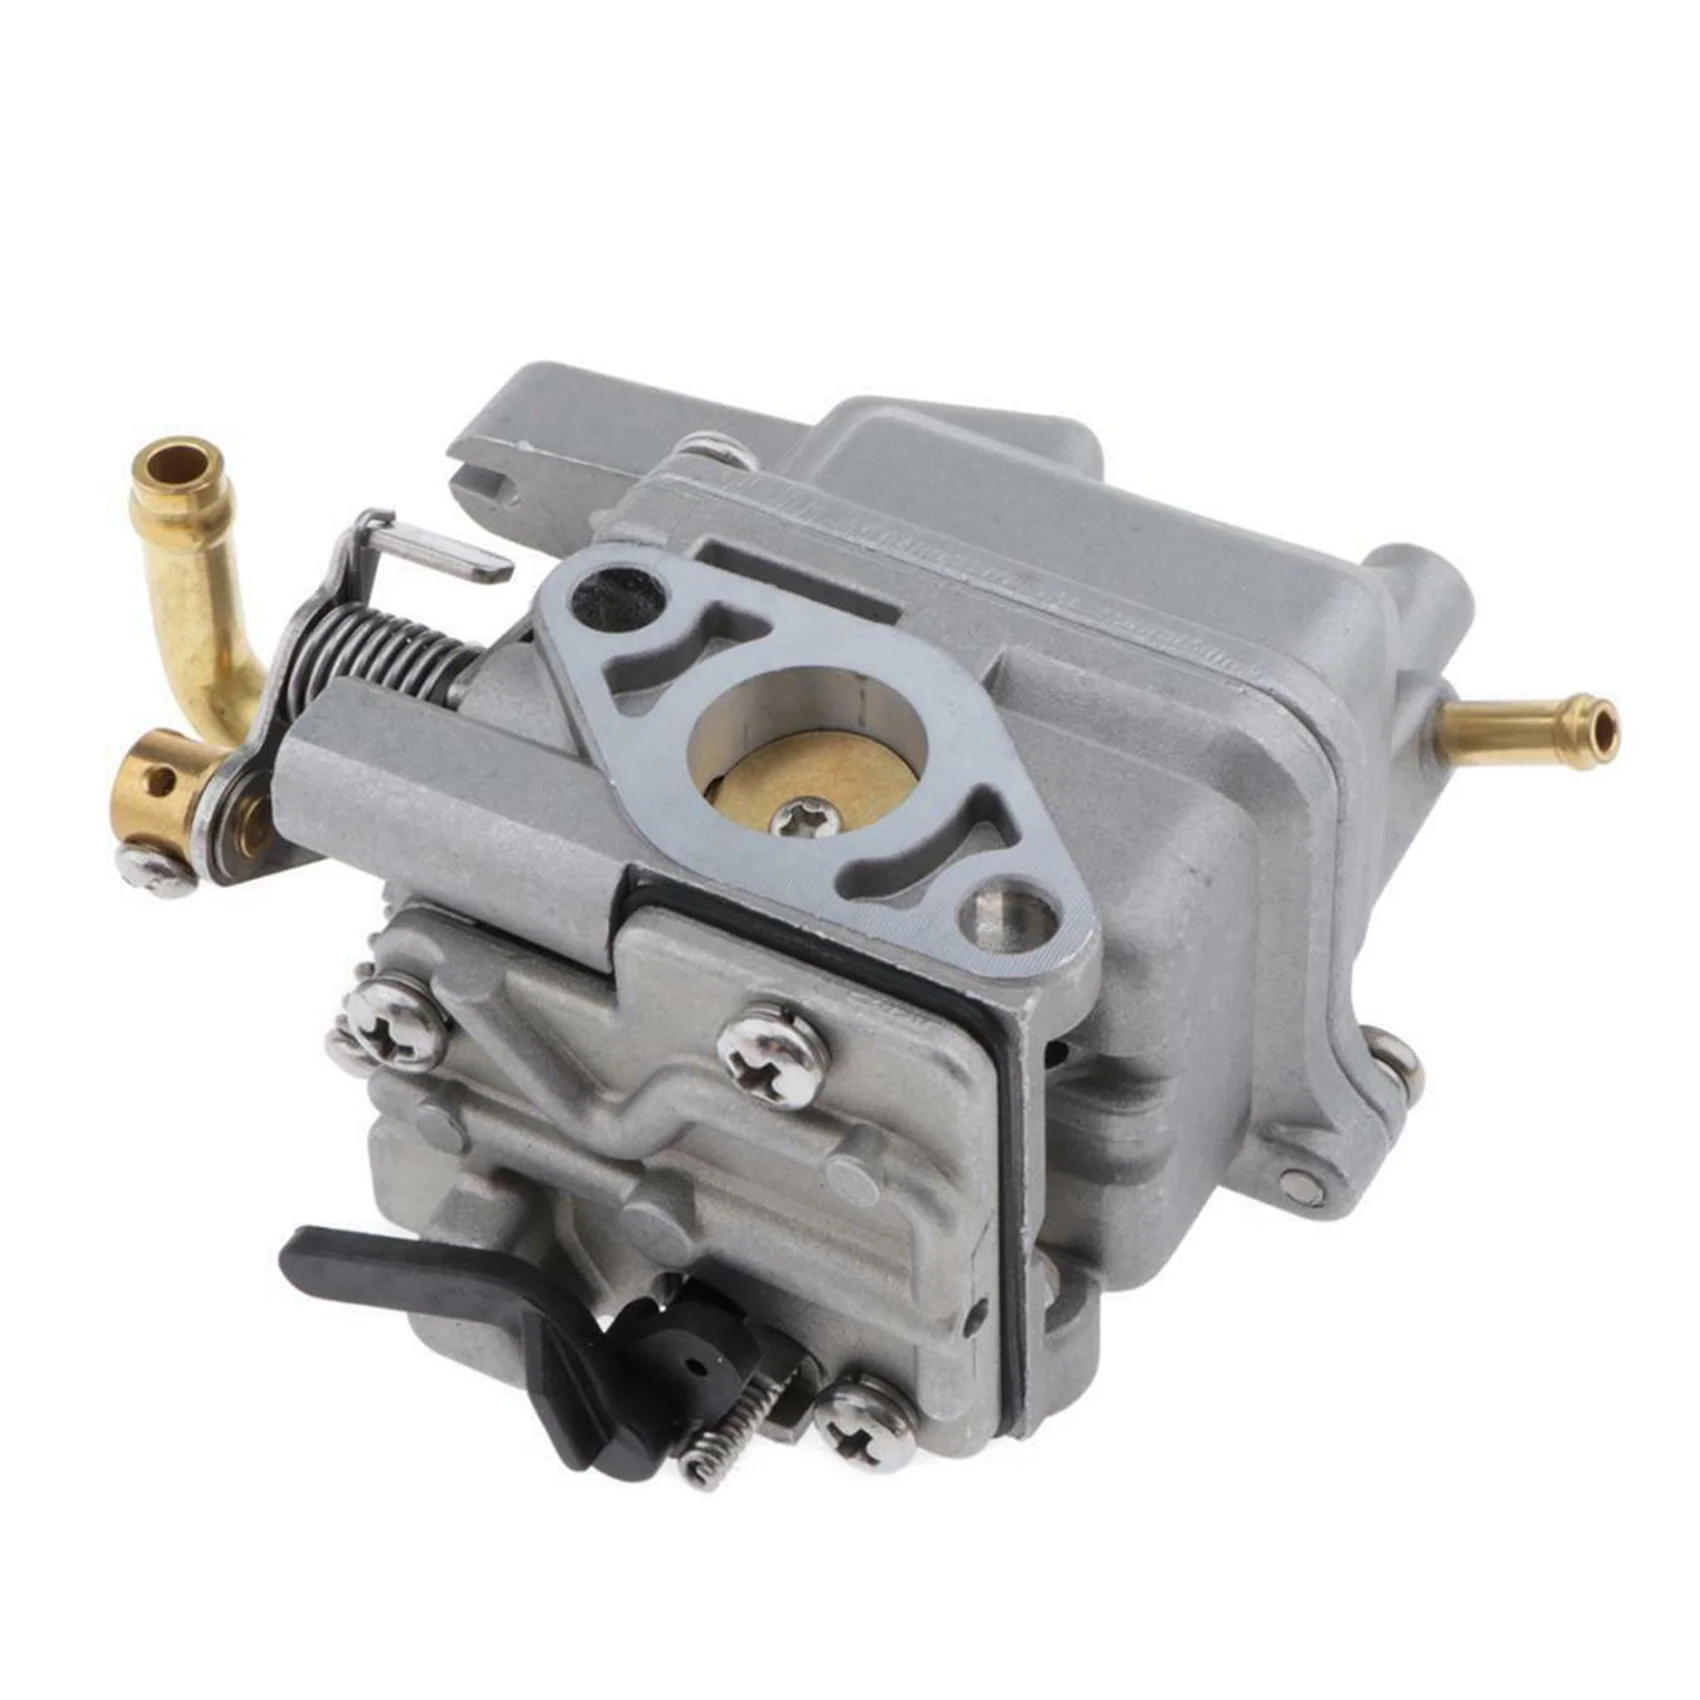 

4 Strokes Motor Carburetor 69M-14301-00 for Yamaha Outboard F 2HP 2.5HP